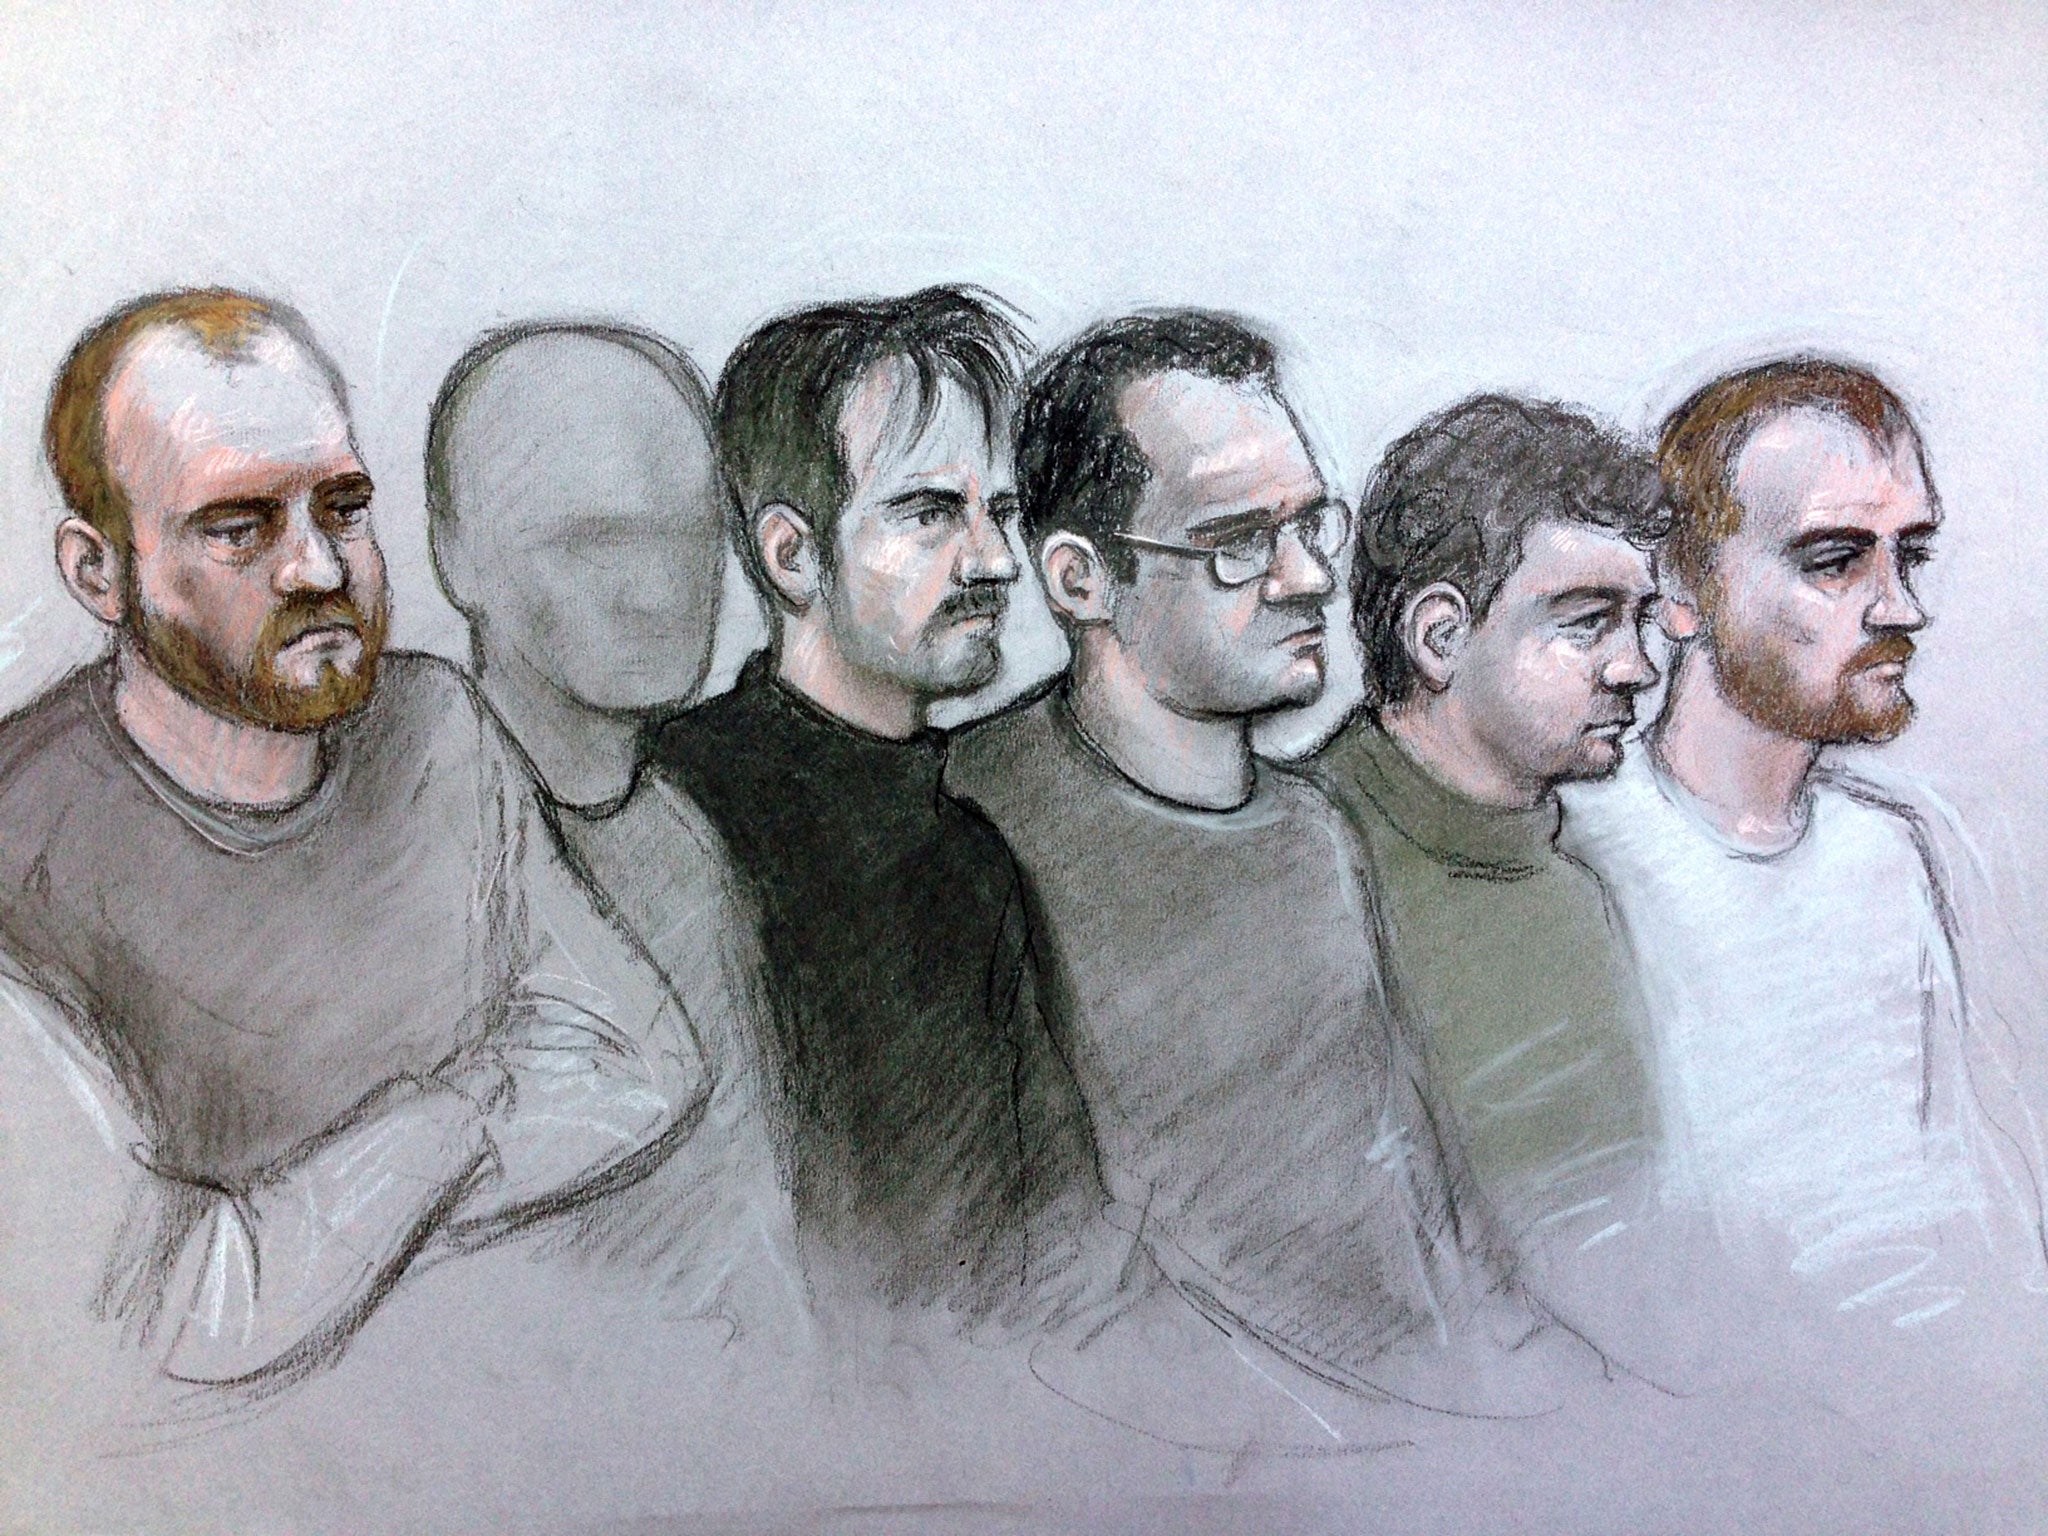 Christopher Lythgoe, a 22-year-old man from Lancashire who cannot be named for legal reasons, Garron Helm, Michael Trubini, Andrew Clarke and Matthew Hankinson at Westminster Magistrates' Court in London